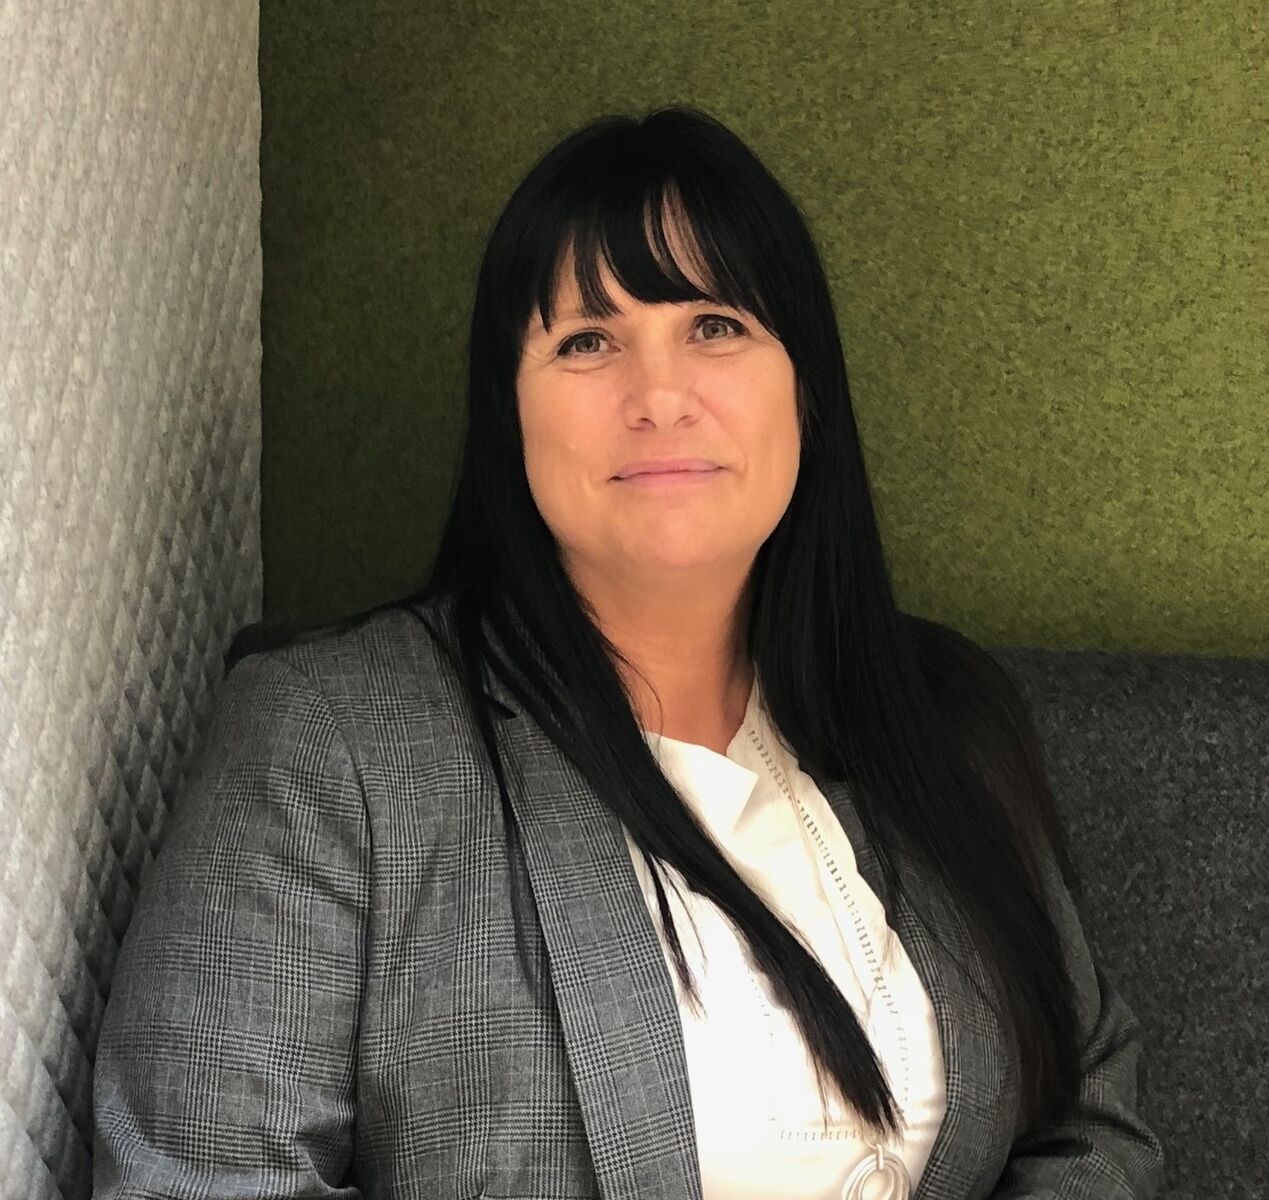 SearchFlow appoints Tracy Burtwell as Sales Director